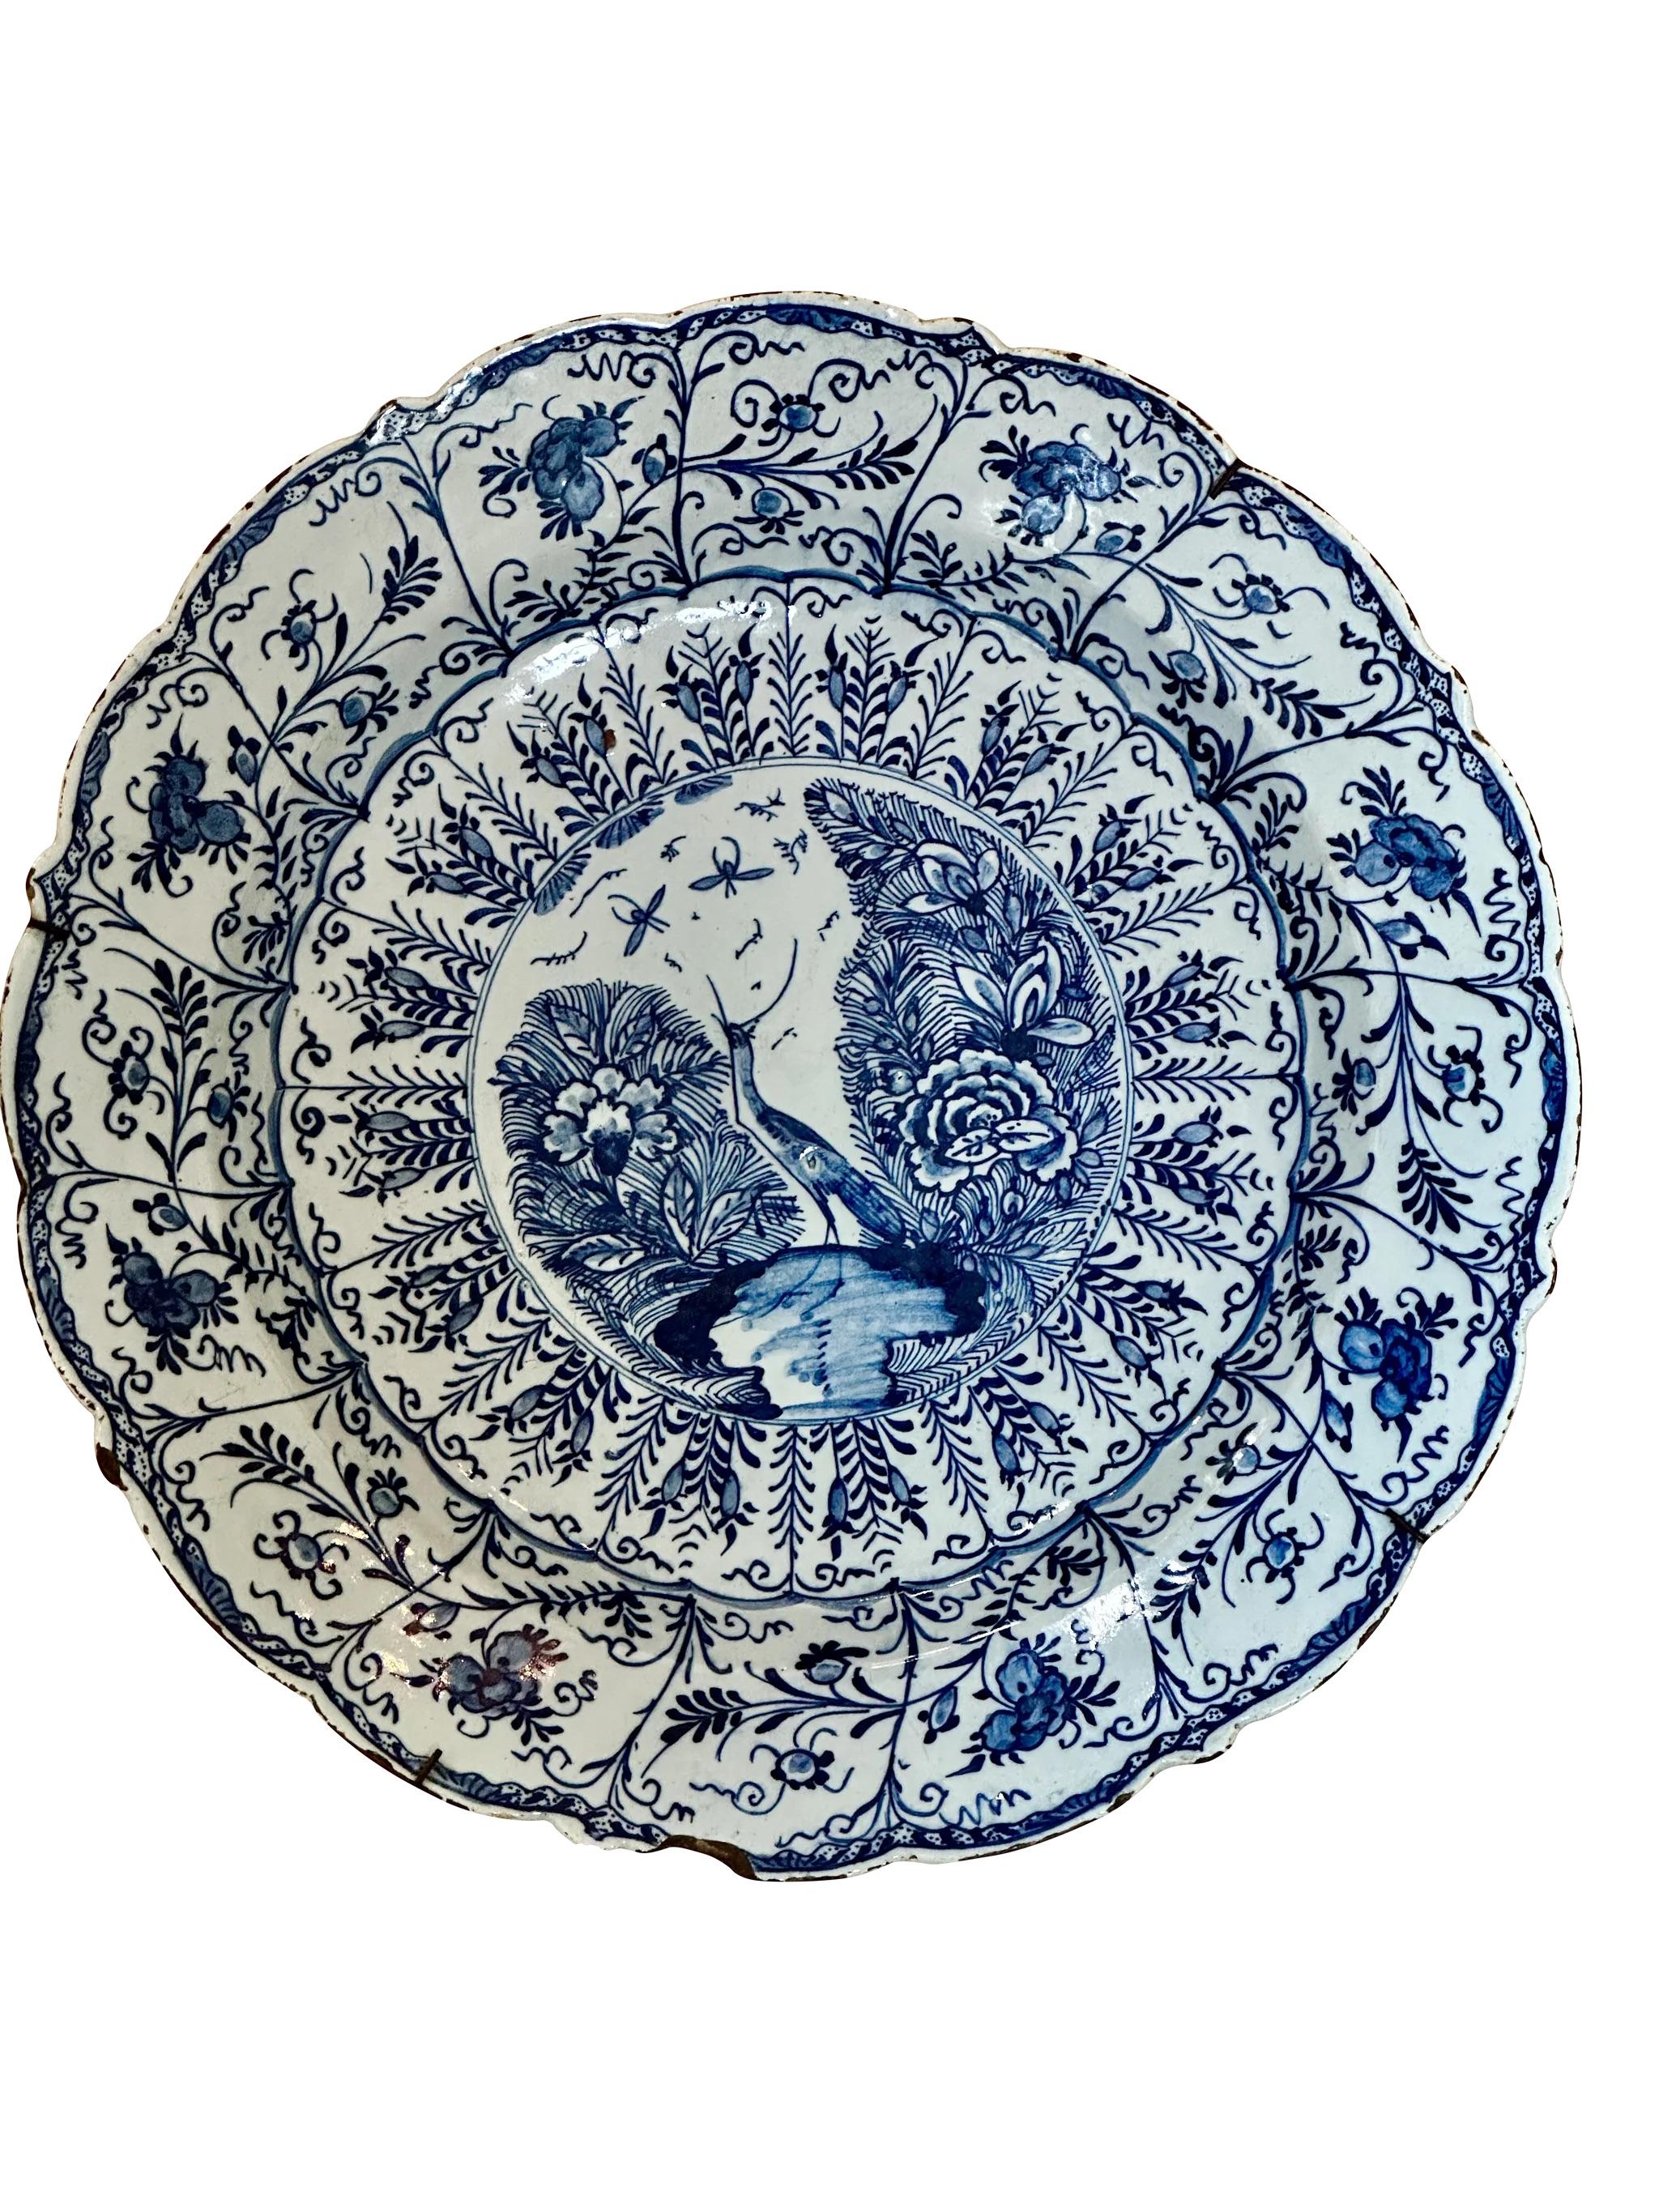 Ceramic Scalloped Blue and White Delft Charger with Crane & Floral Decoration, 18th Cent For Sale